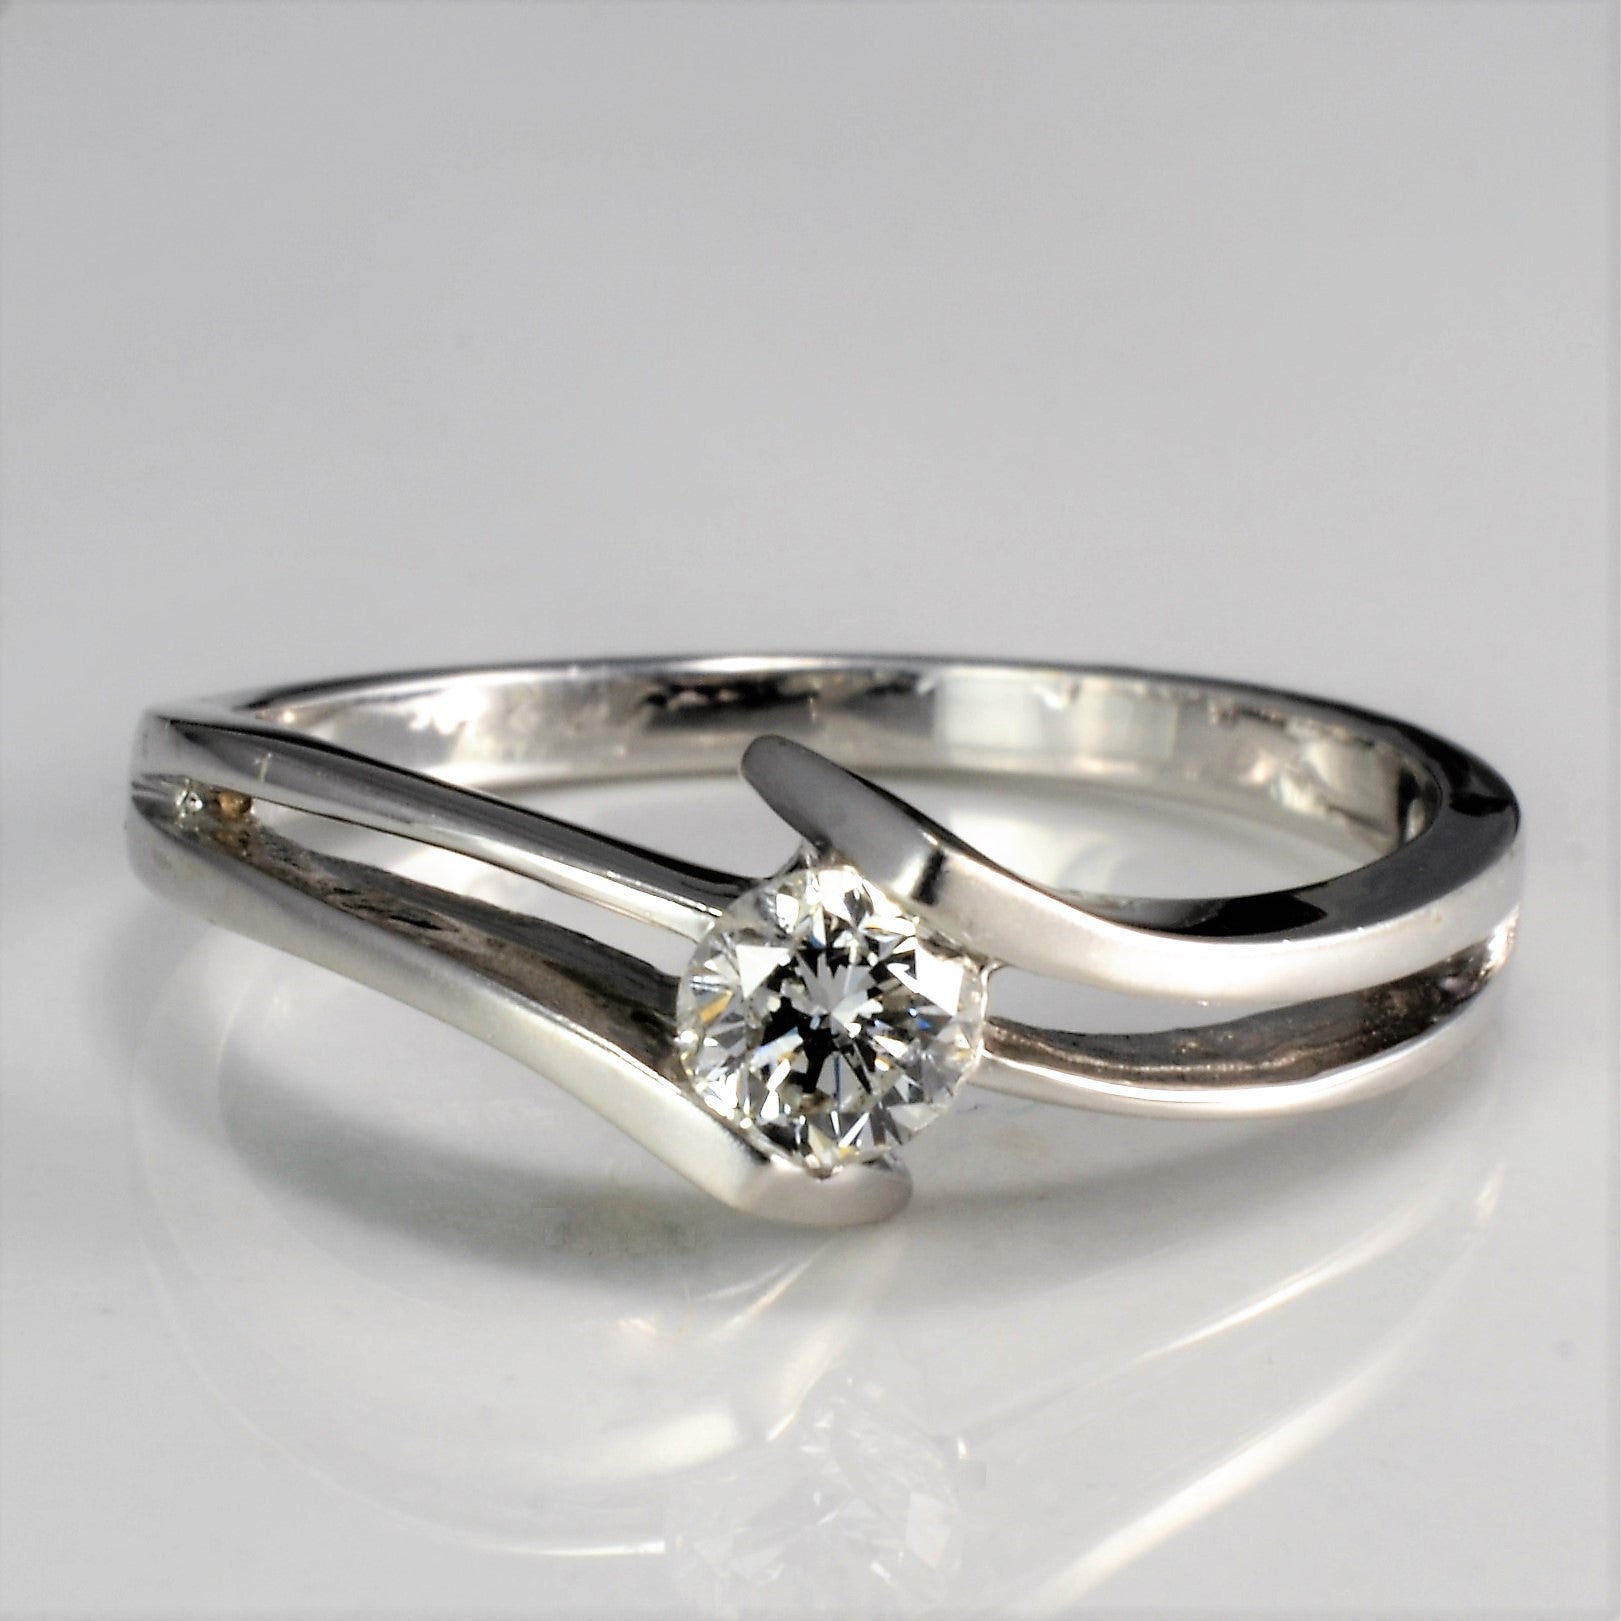 Bypass Solitaire Diamond Ring | 0.23 ct, SZ 6.25 |